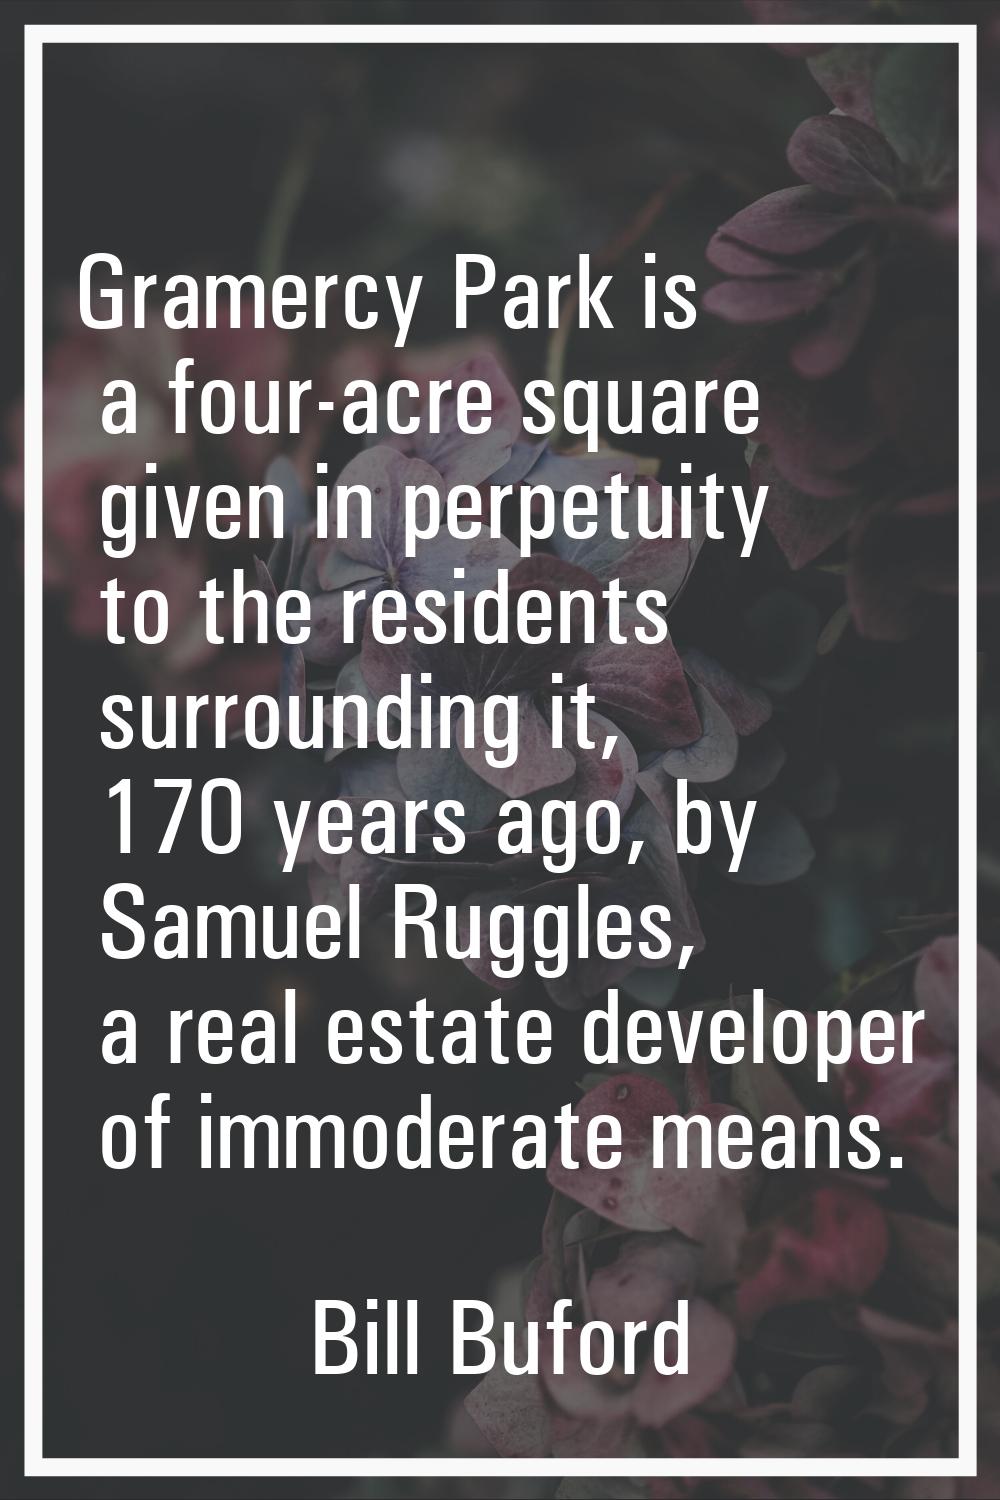 Gramercy Park is a four-acre square given in perpetuity to the residents surrounding it, 170 years 